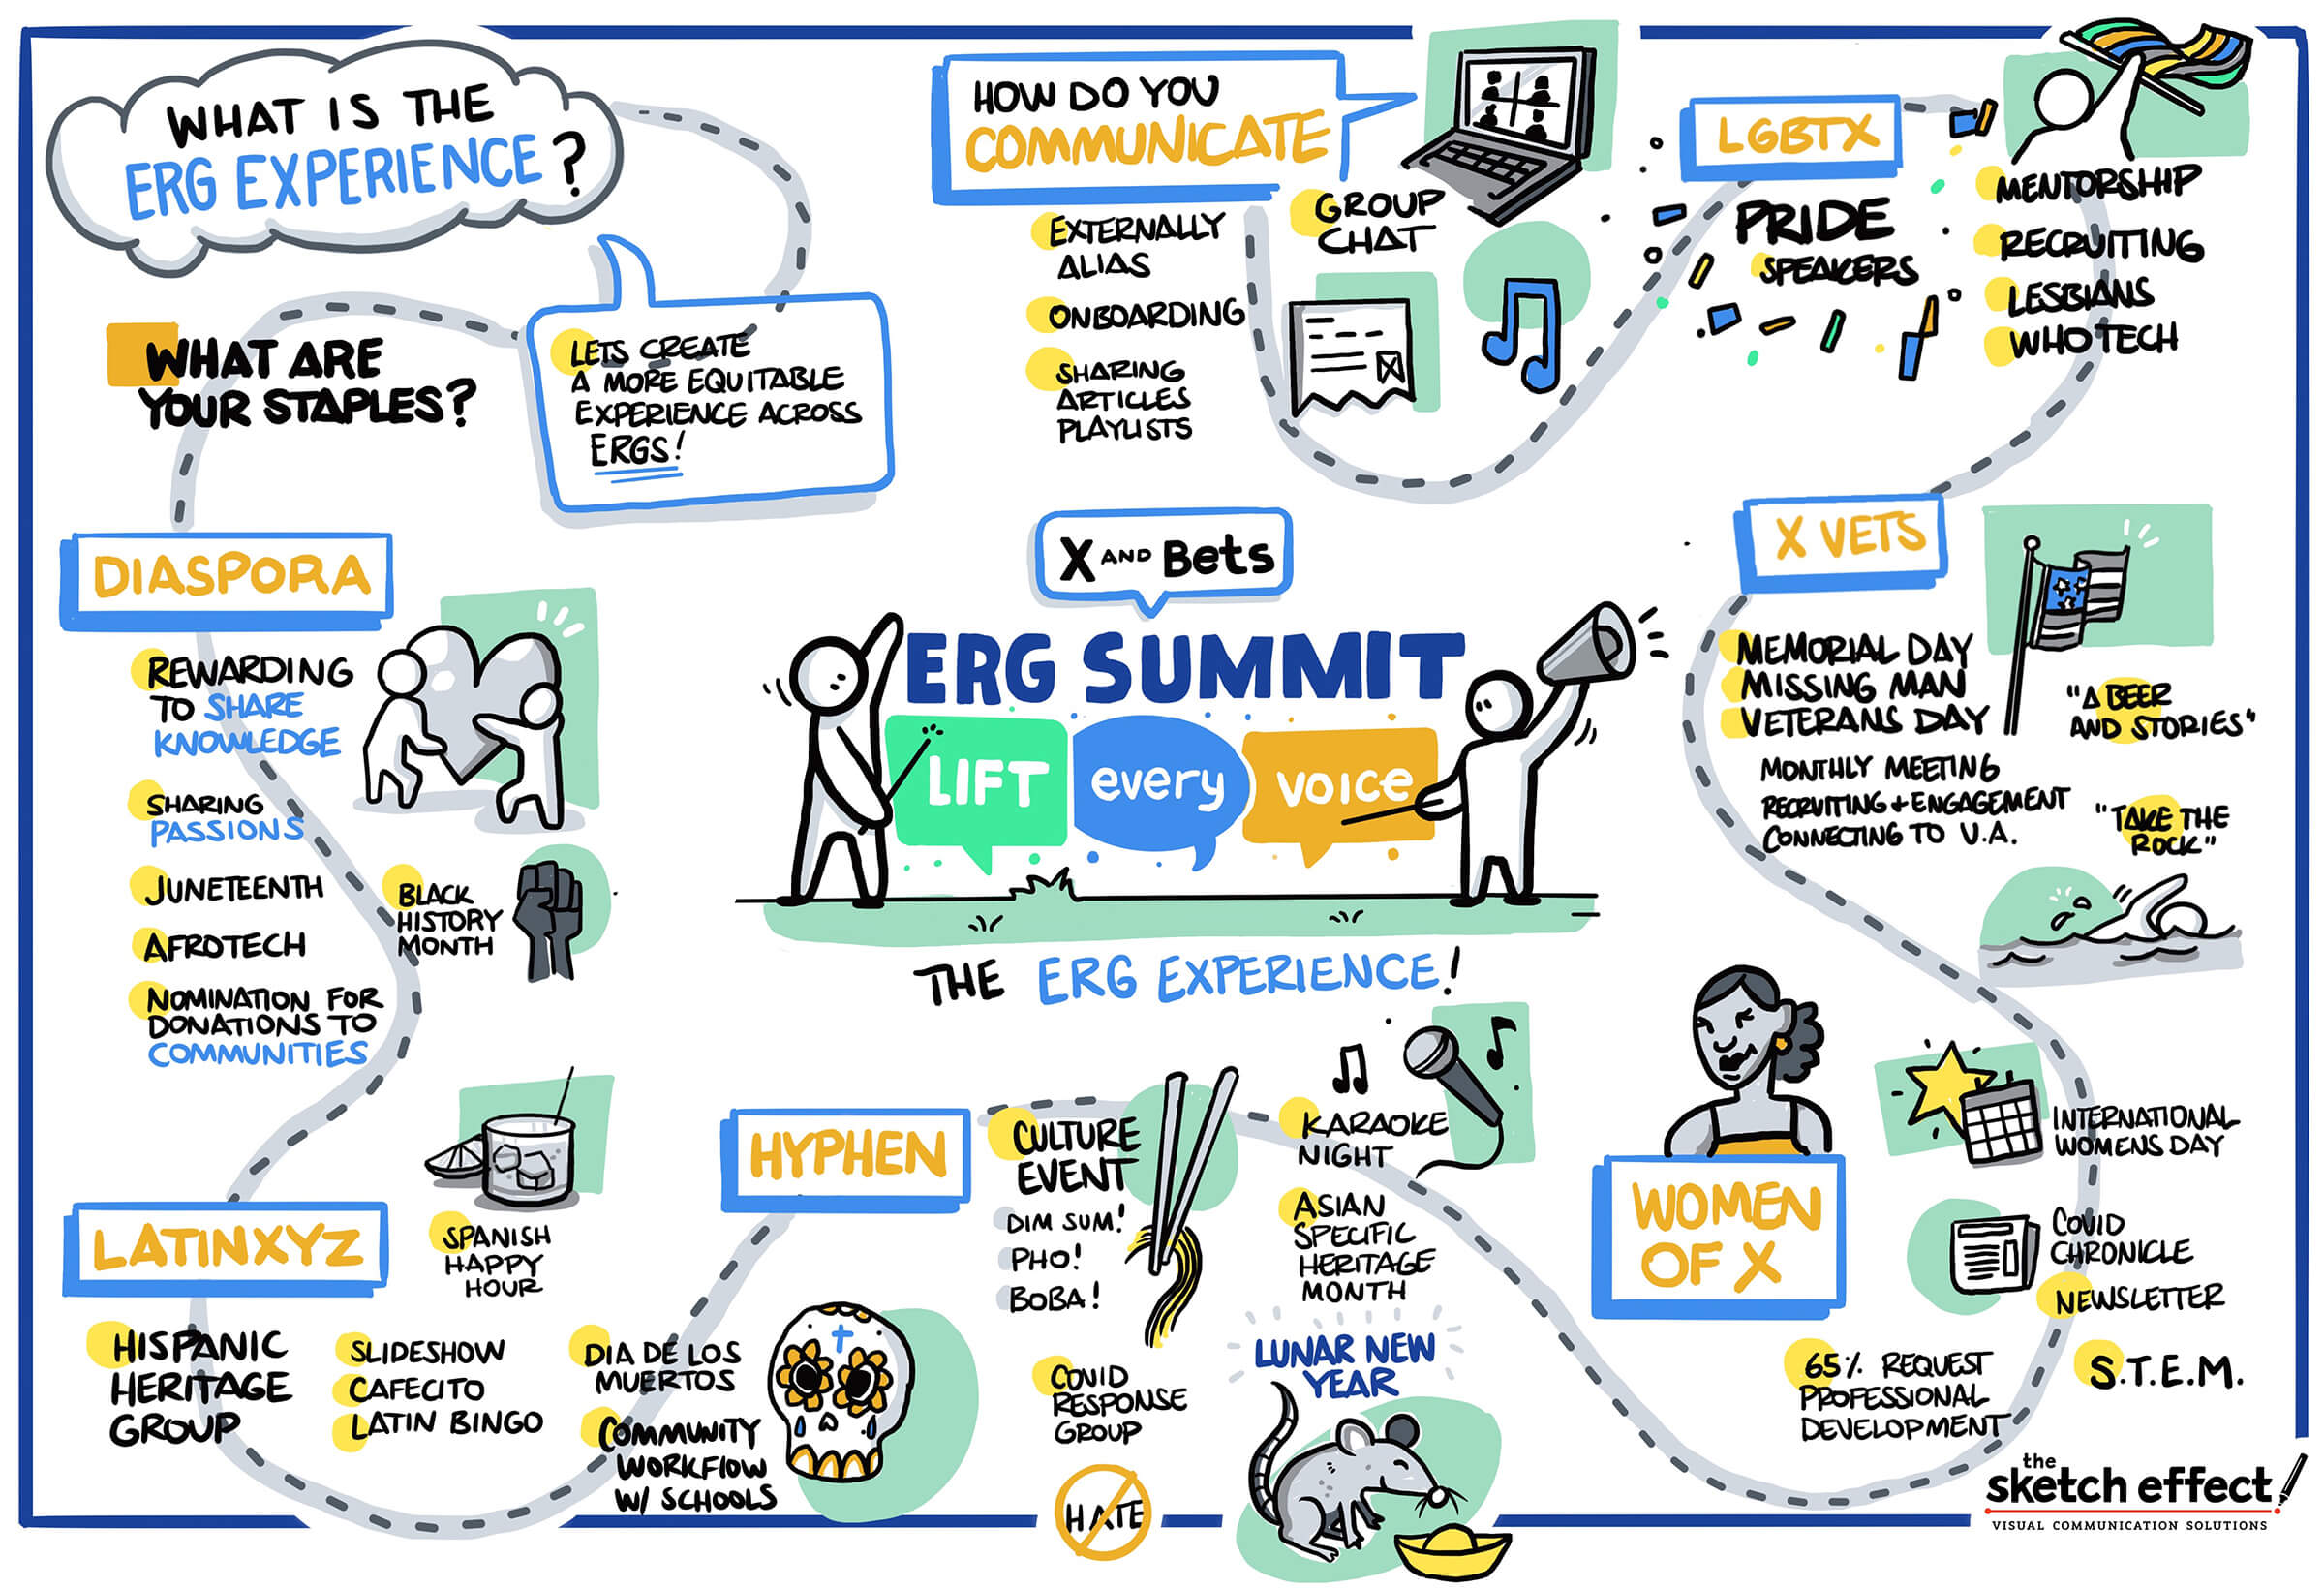 Graphic recording by The Sketch Effect for the ERG Summit